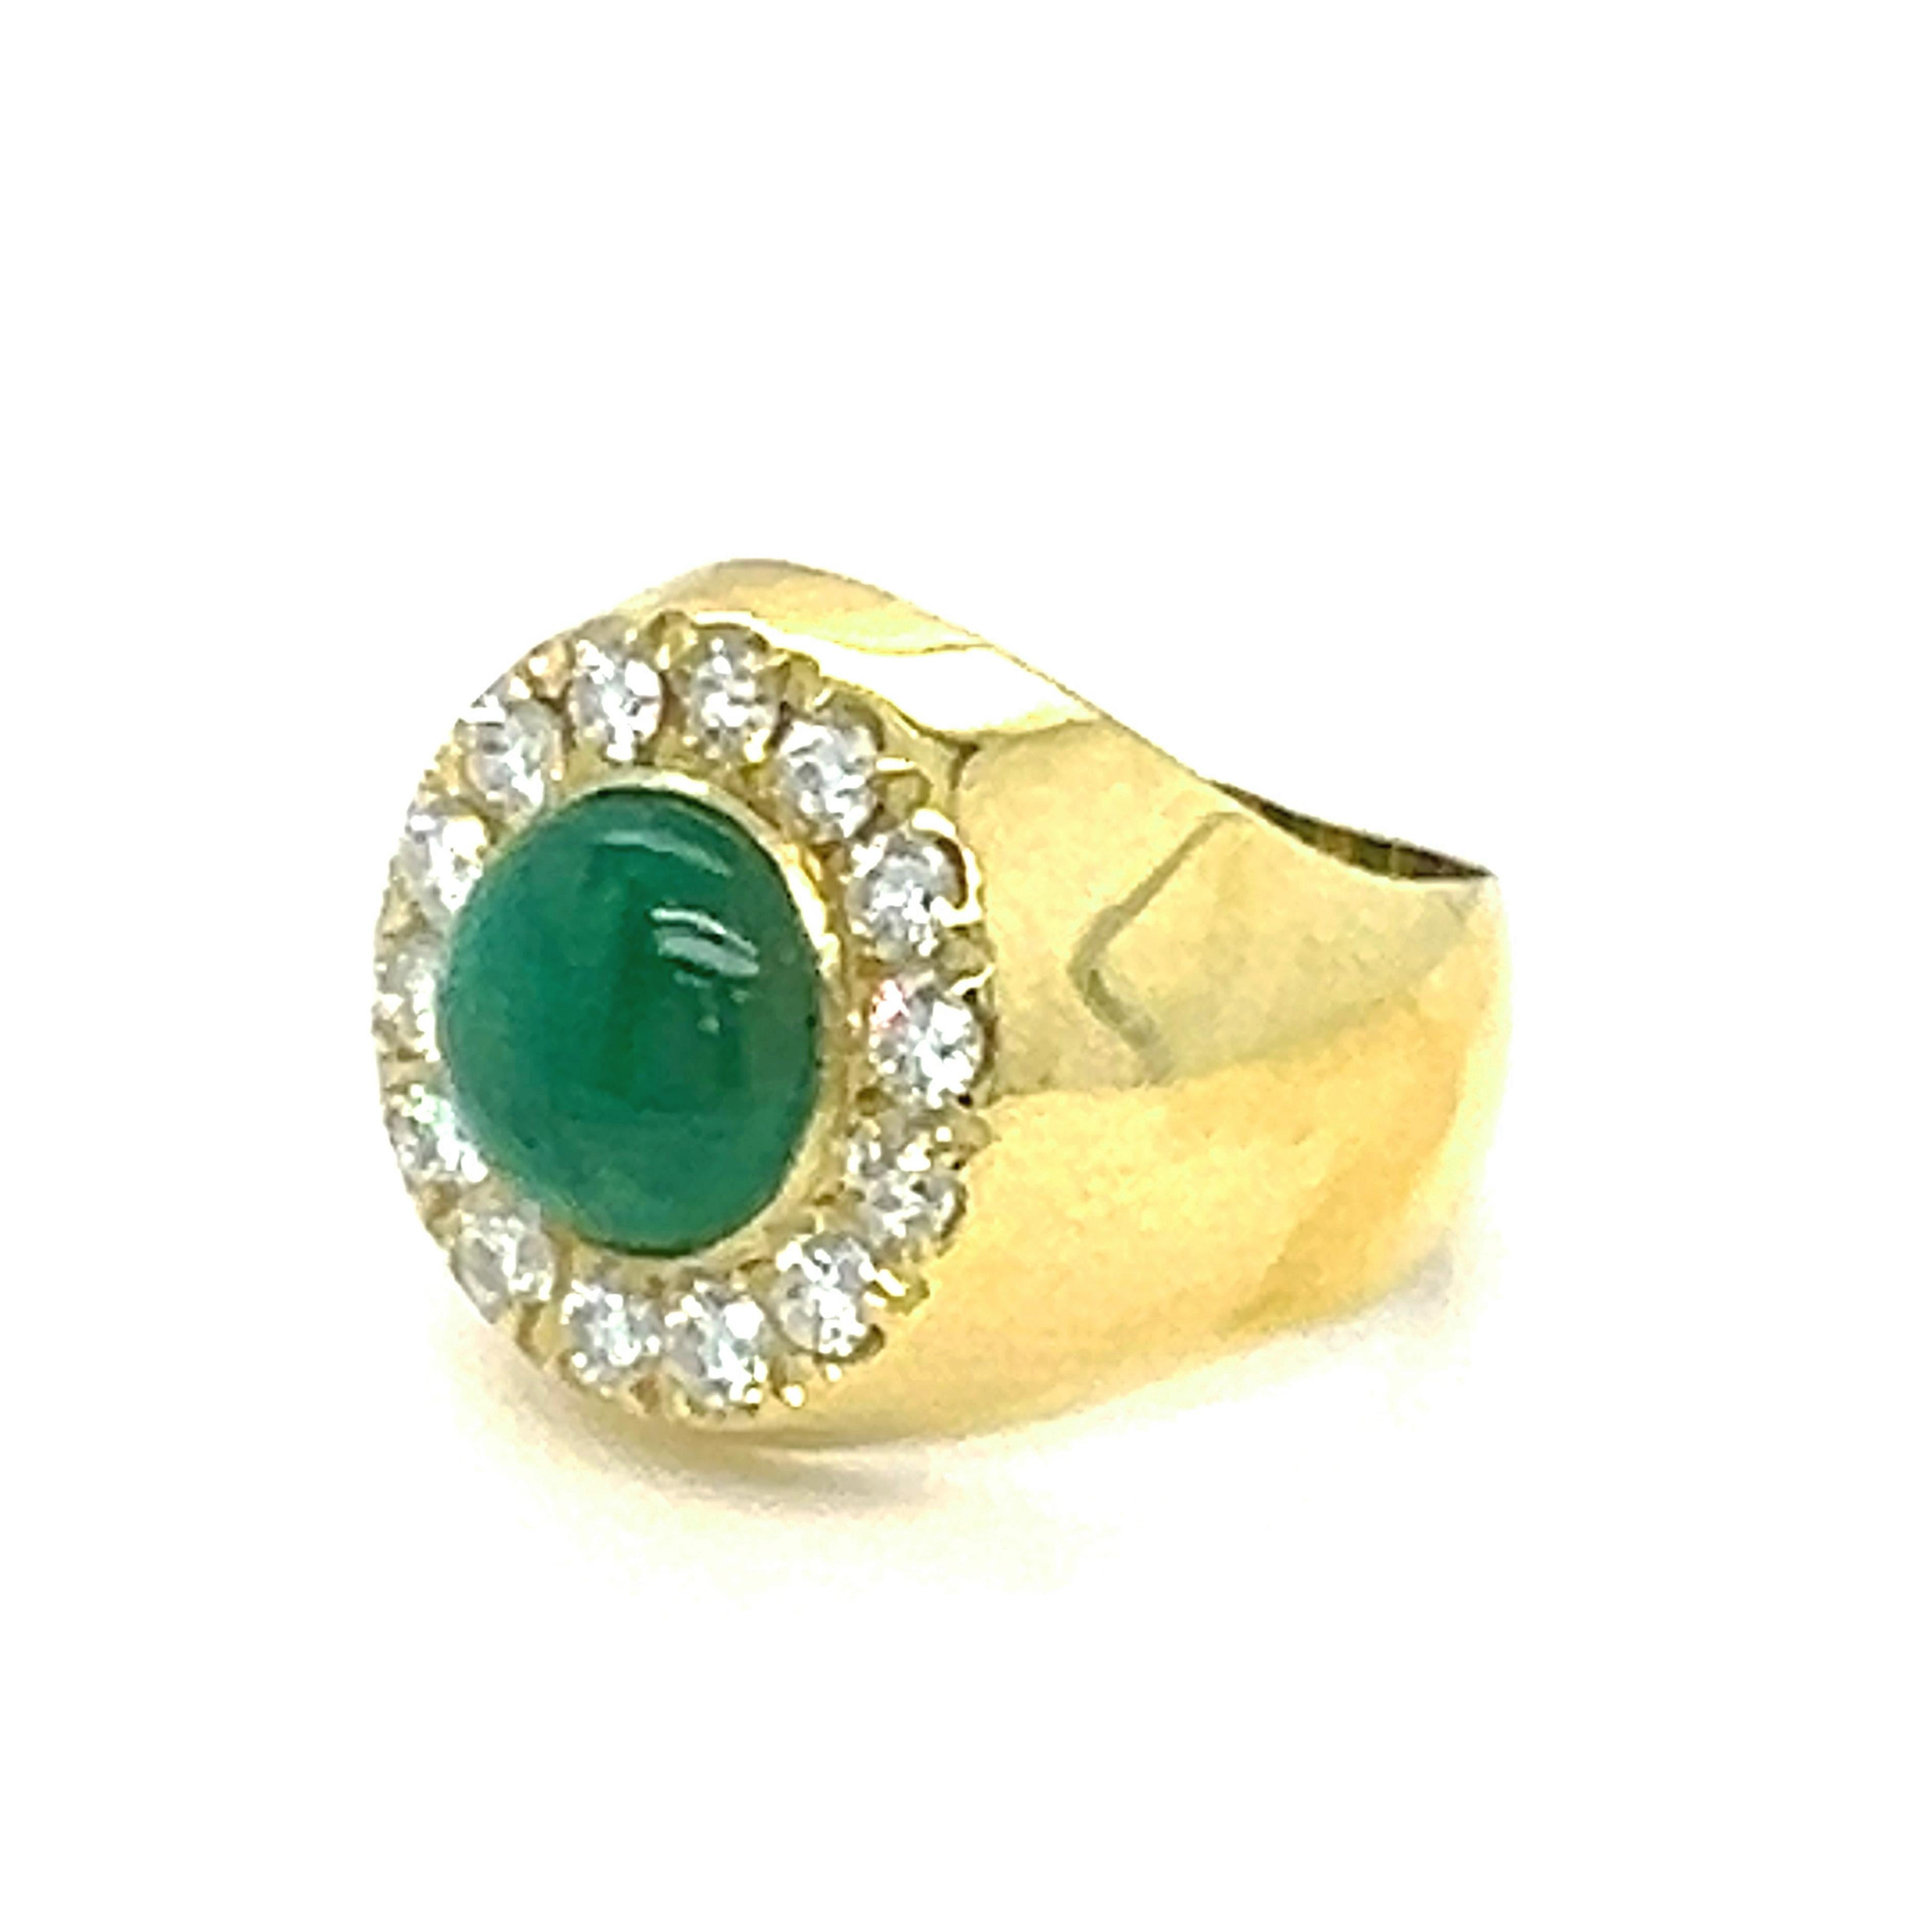 Berca 2.09Kt Natural Emerald Cabochon White Diamond Gold Cocktail Ring In New Condition For Sale In Valenza, IT